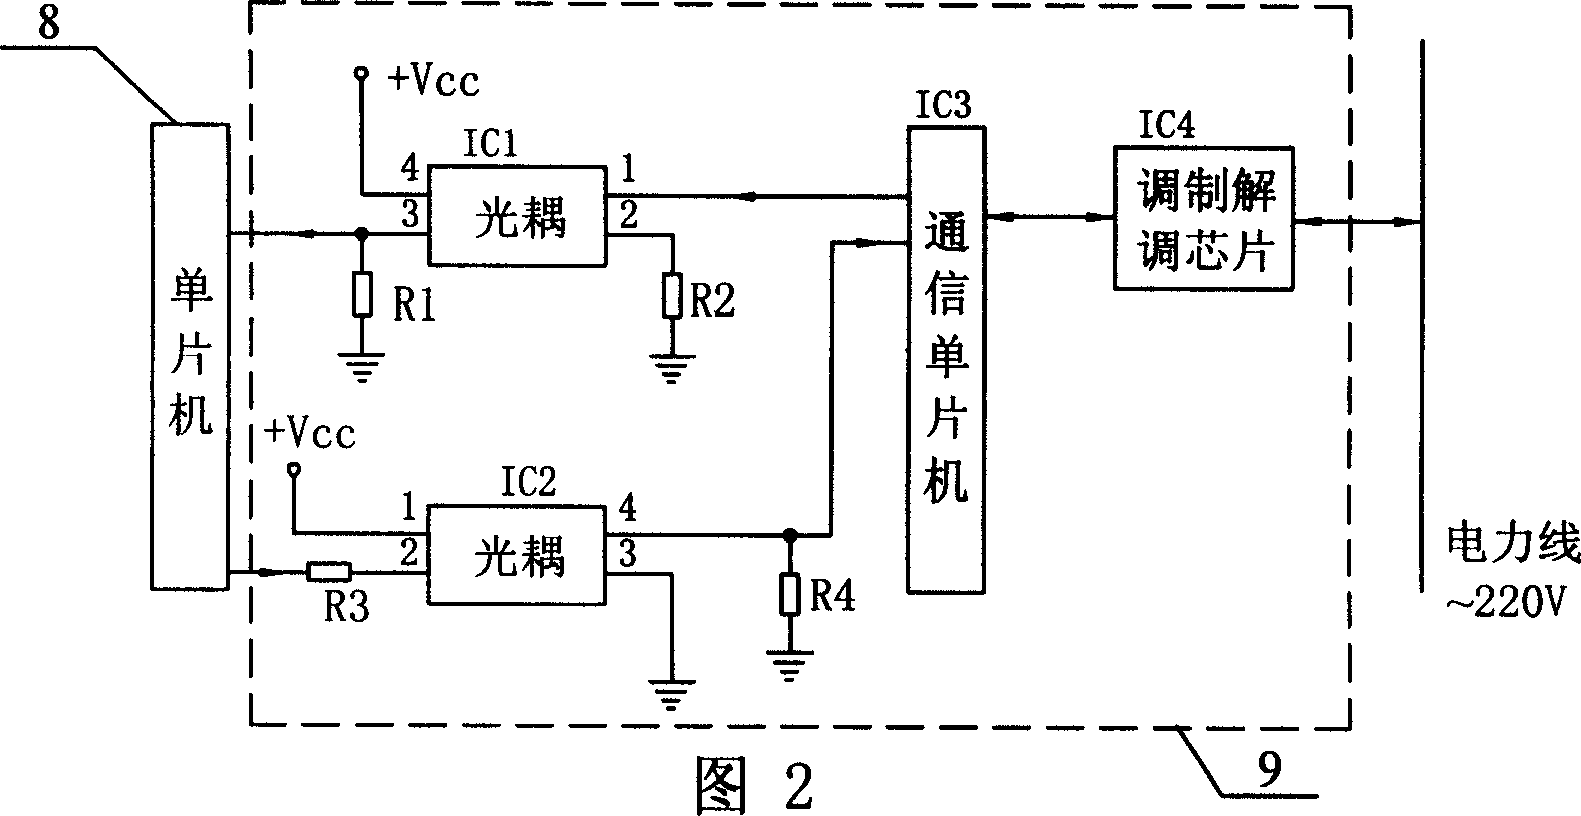 Special electronic ballast resistor in gas discharging light long-range controlling system